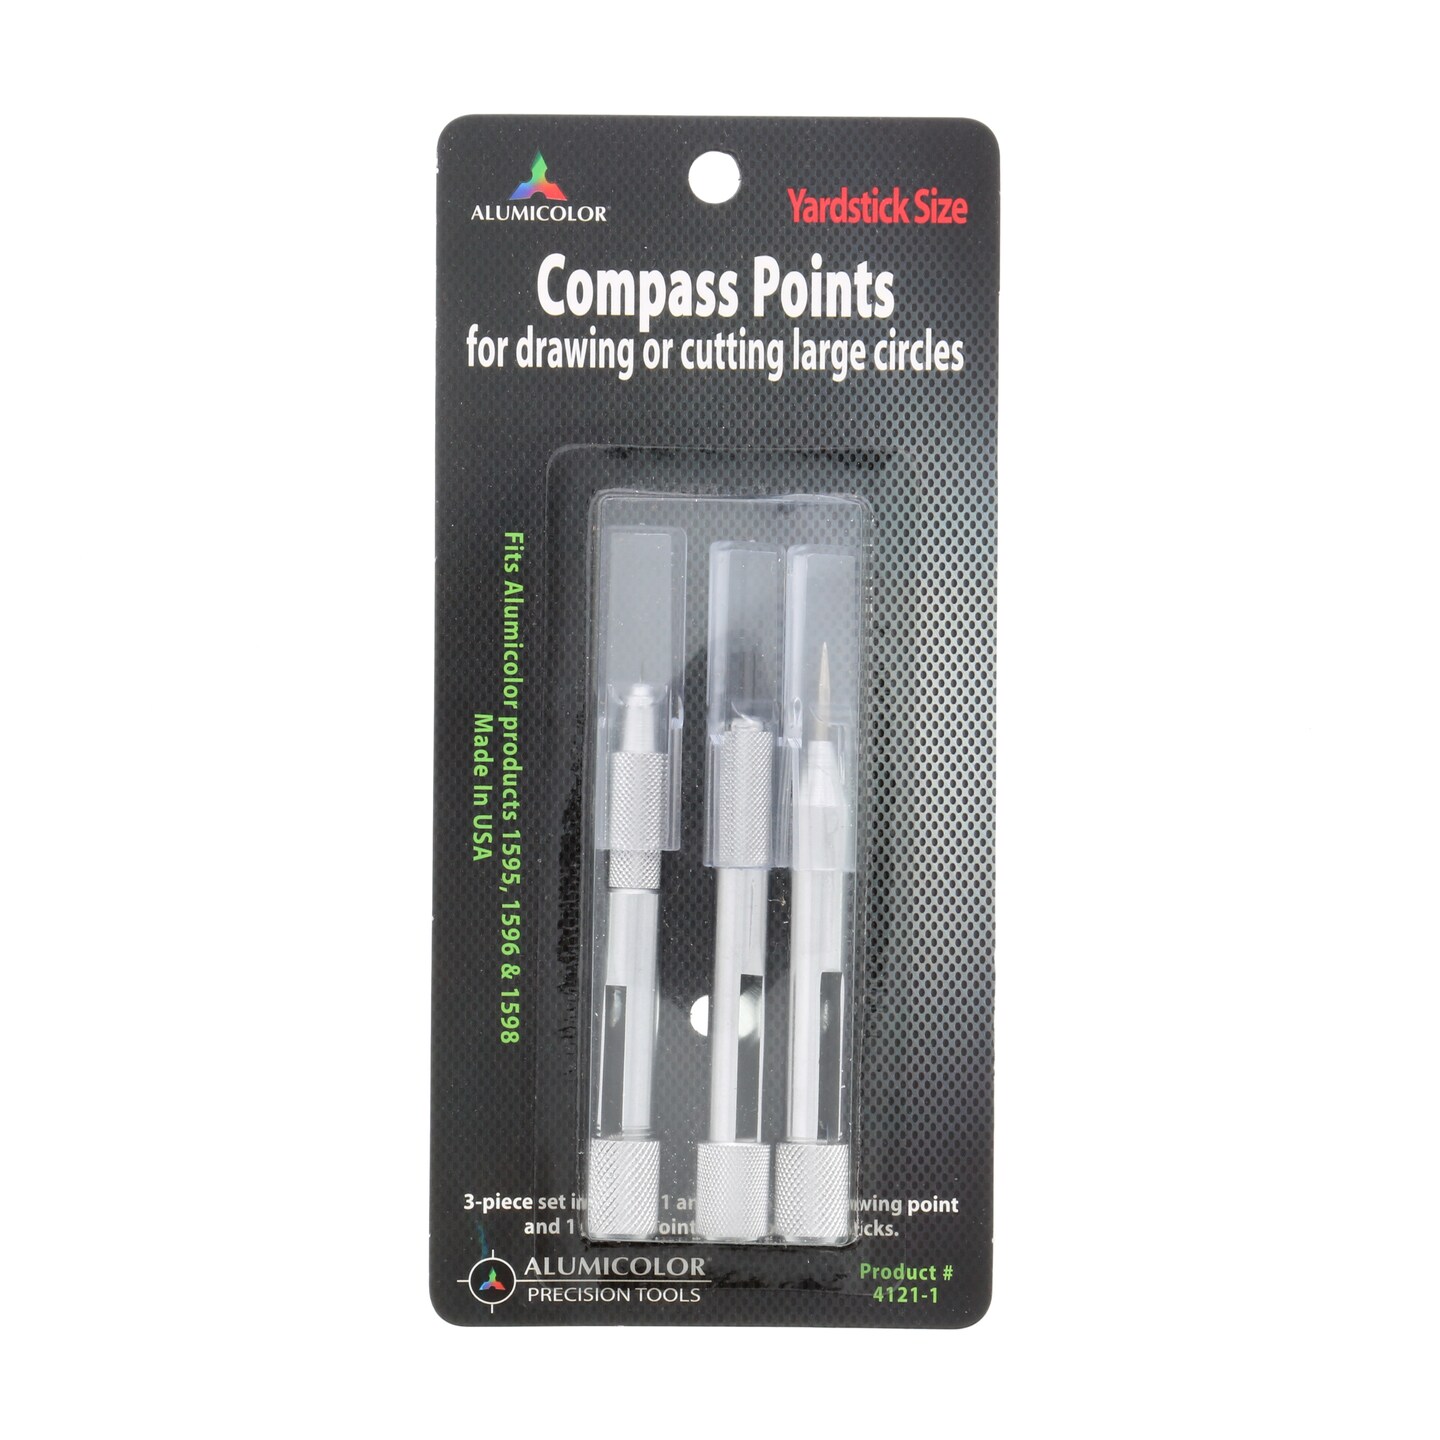 Alumicolor Compass Point Kit, Yard Stick Compass Points